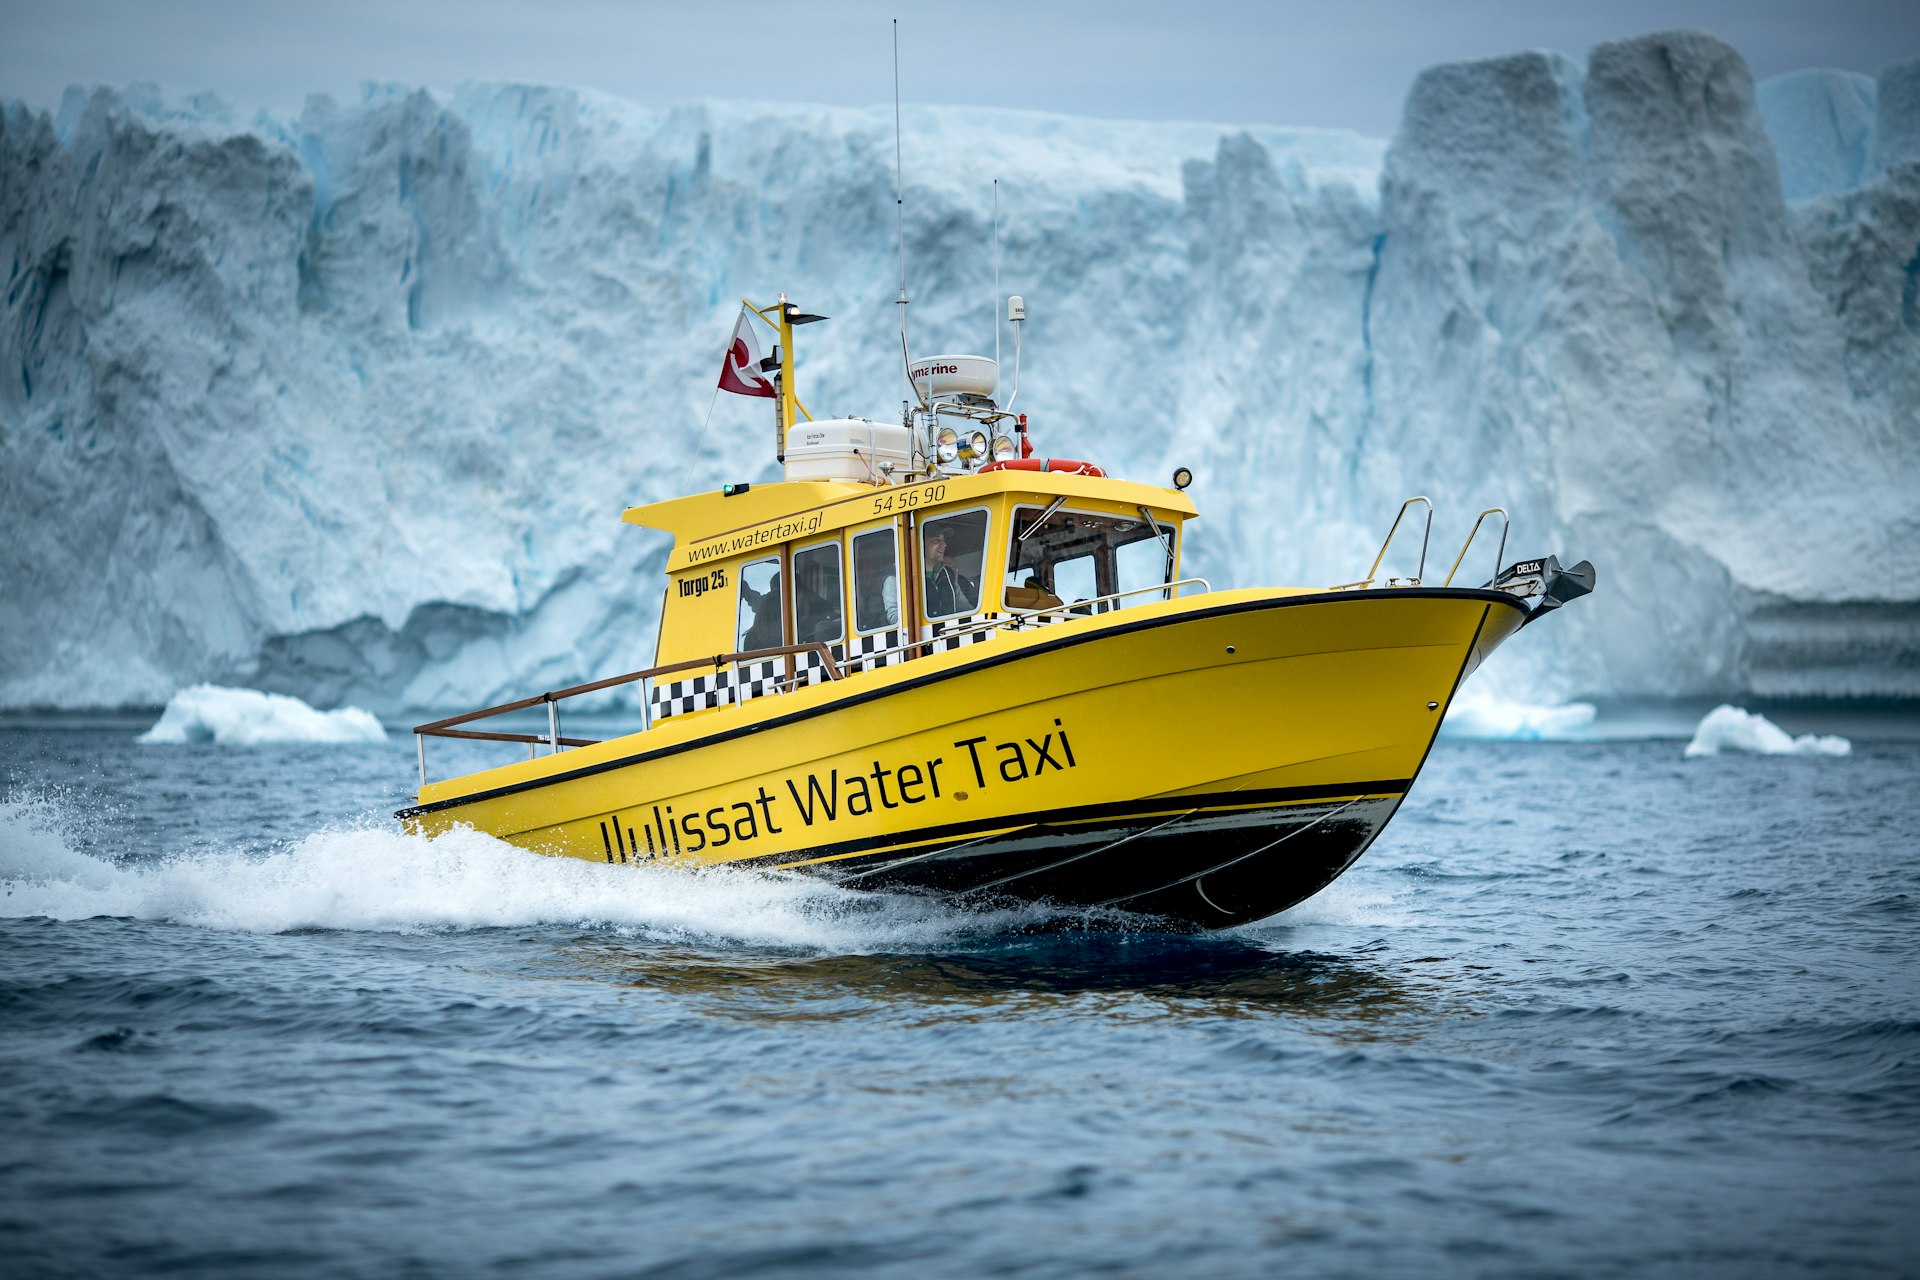 The yellow Ilulissat Water Taxi cuts the water in Greenland in front of icebergs